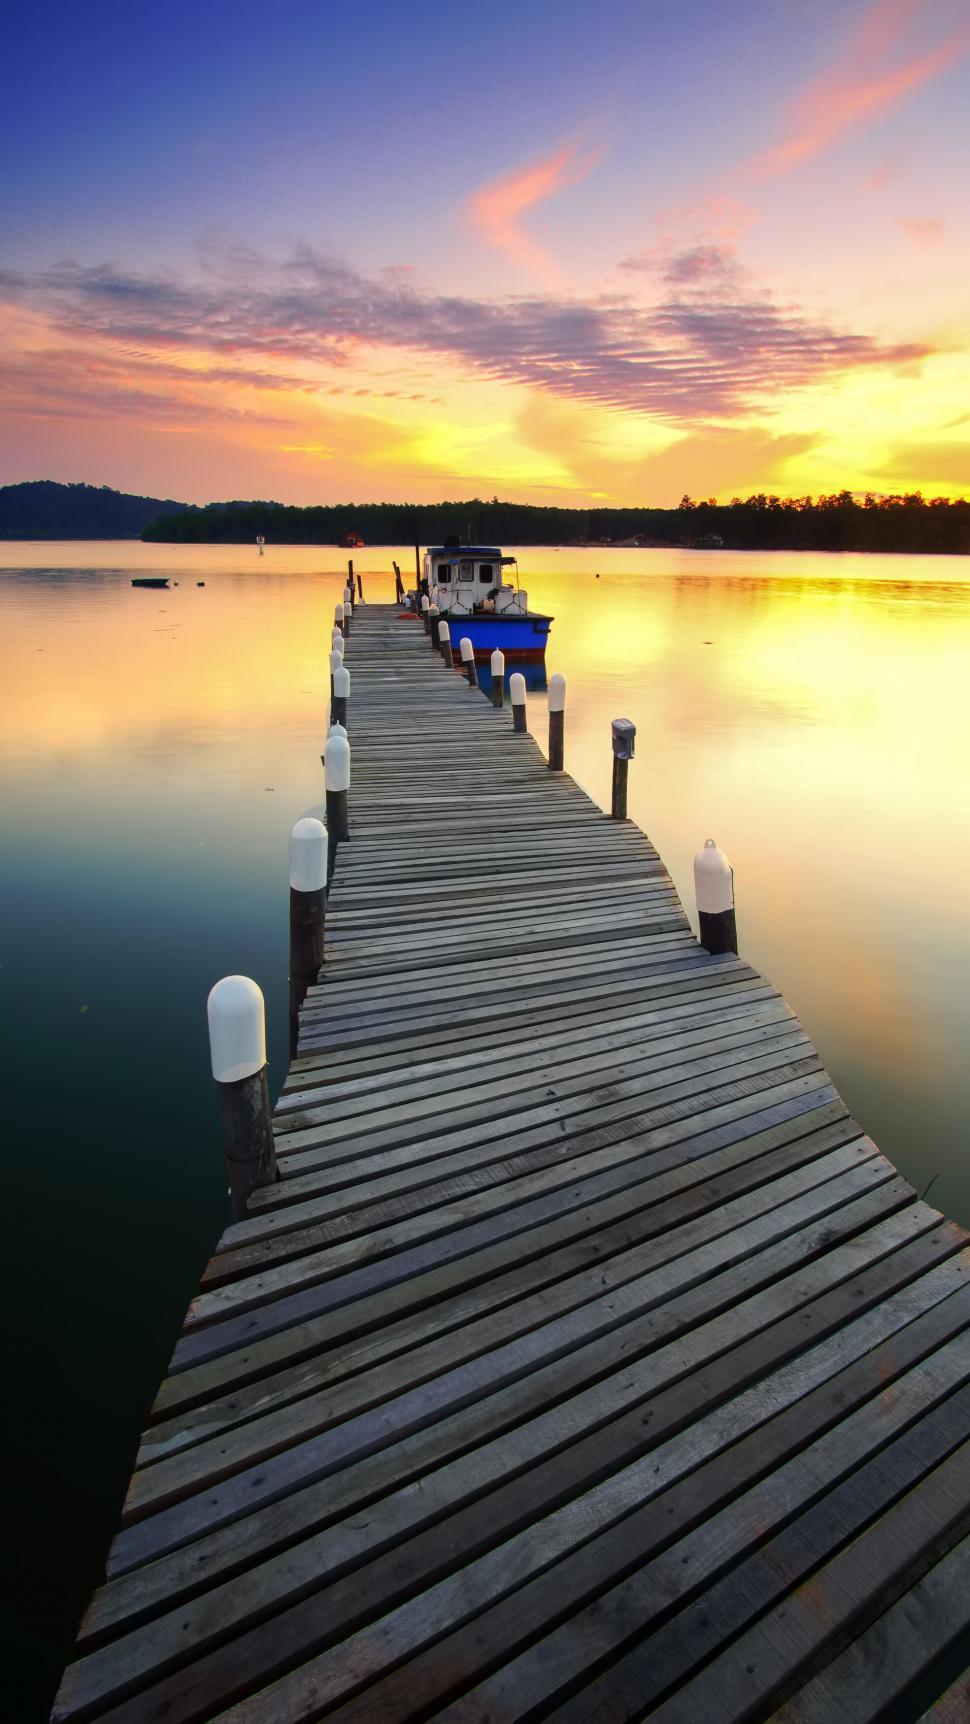 Free Image of Wooden jetty on a calm lake at sunset 